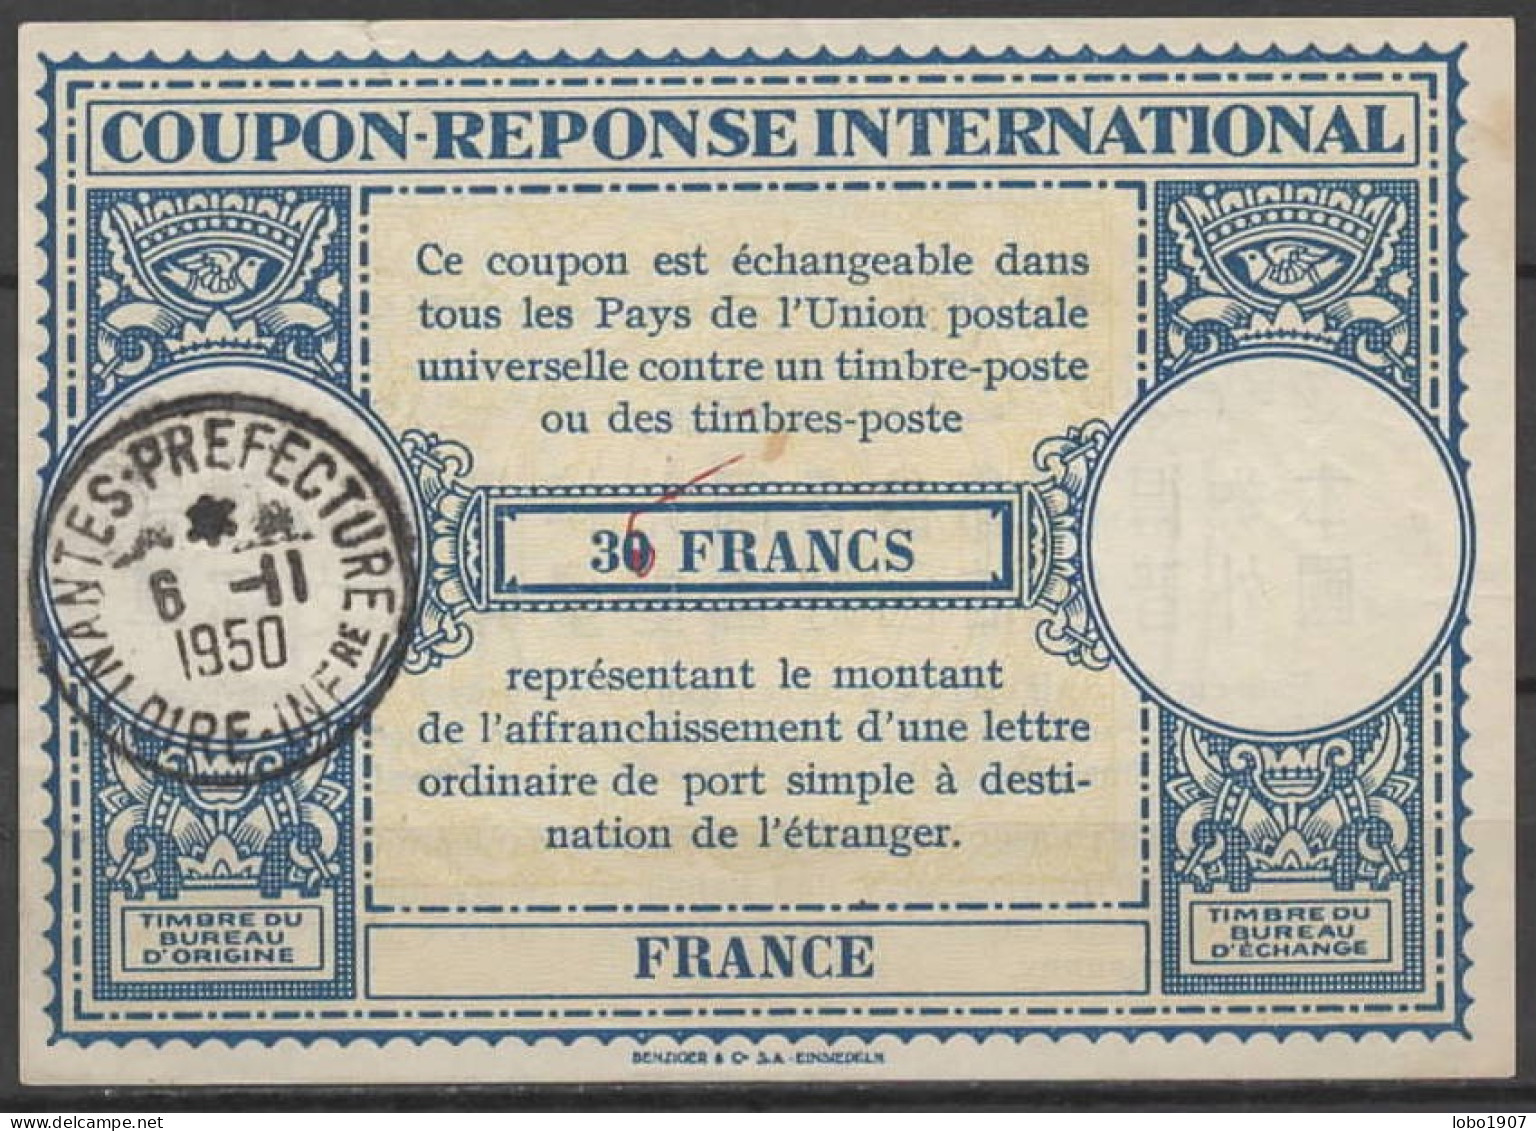 FRANCE Lo15 35 / 30 FRANCS International Reply Coupon Reponse Antwortschein IRC IAS O NANTES PREFECTURE 06.11.50 - Reply Coupons